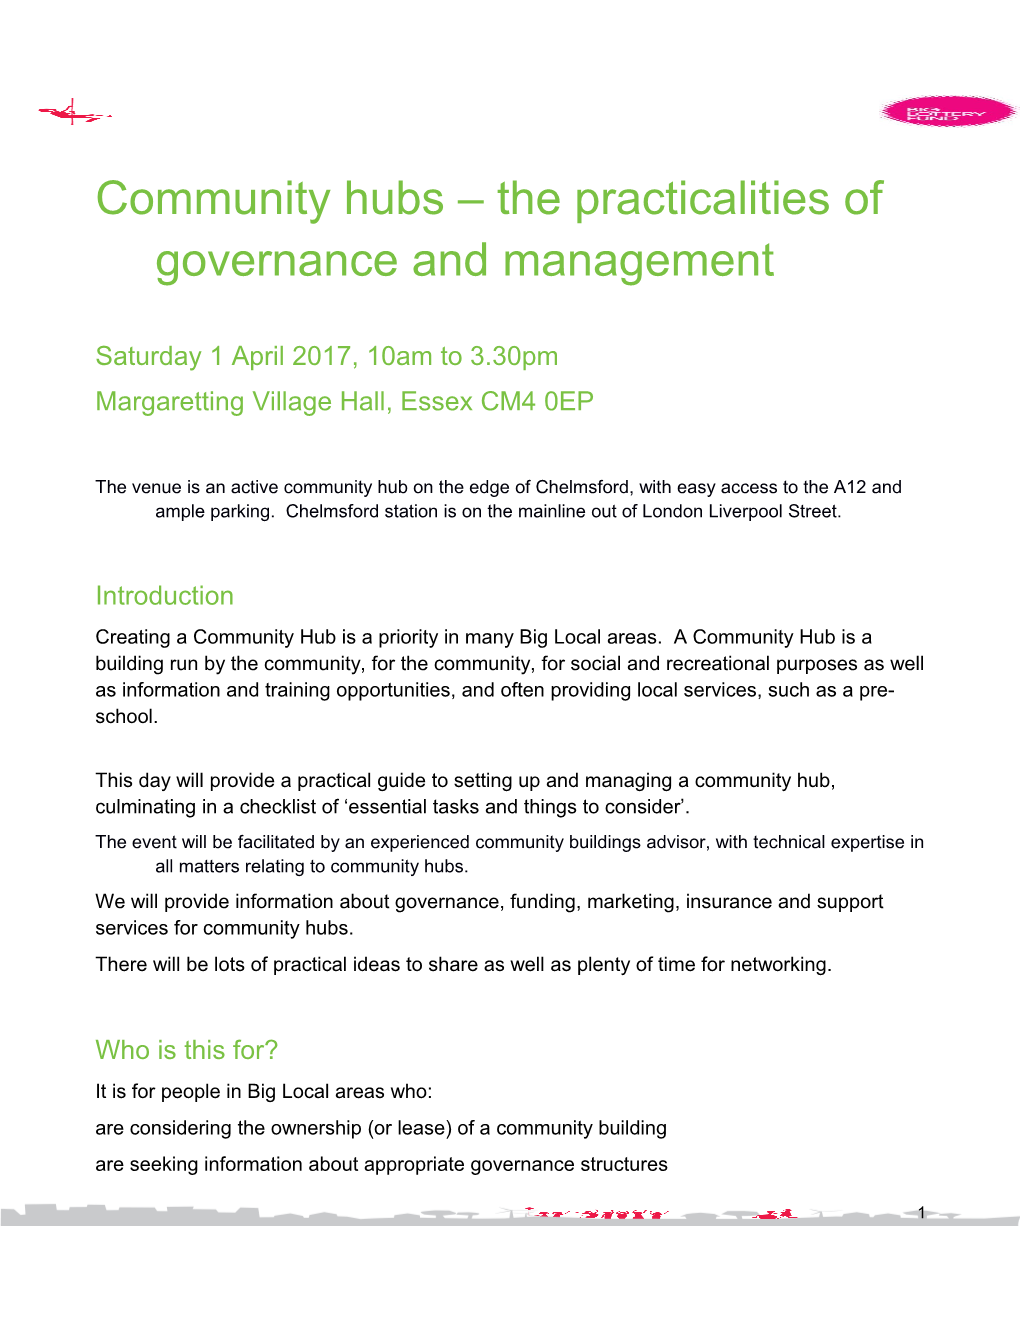 Community Hubs the Practicalities of Governance and Management